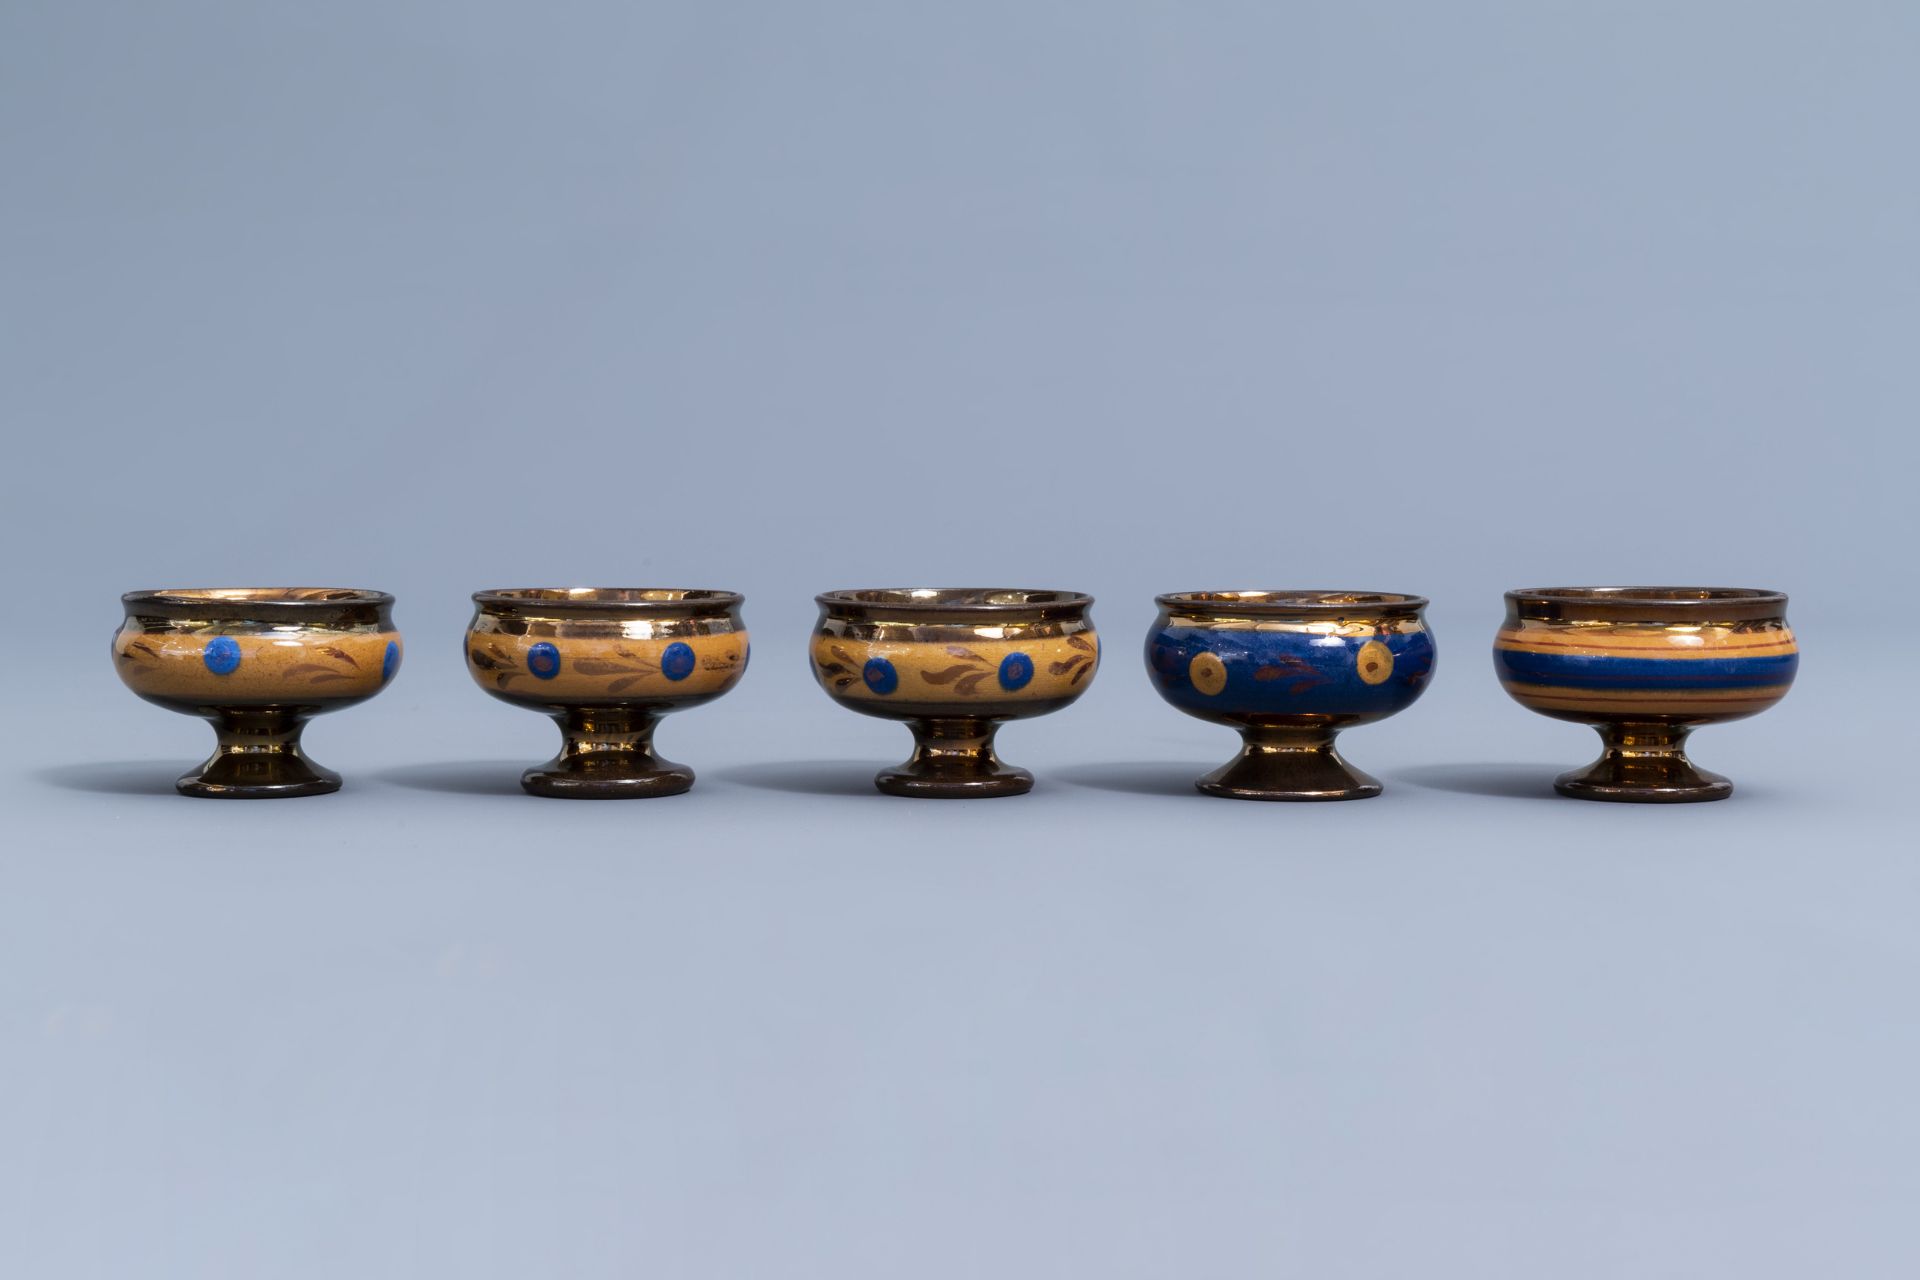 A varied collection of English lustreware items with blue design, 19th C. - Image 20 of 50